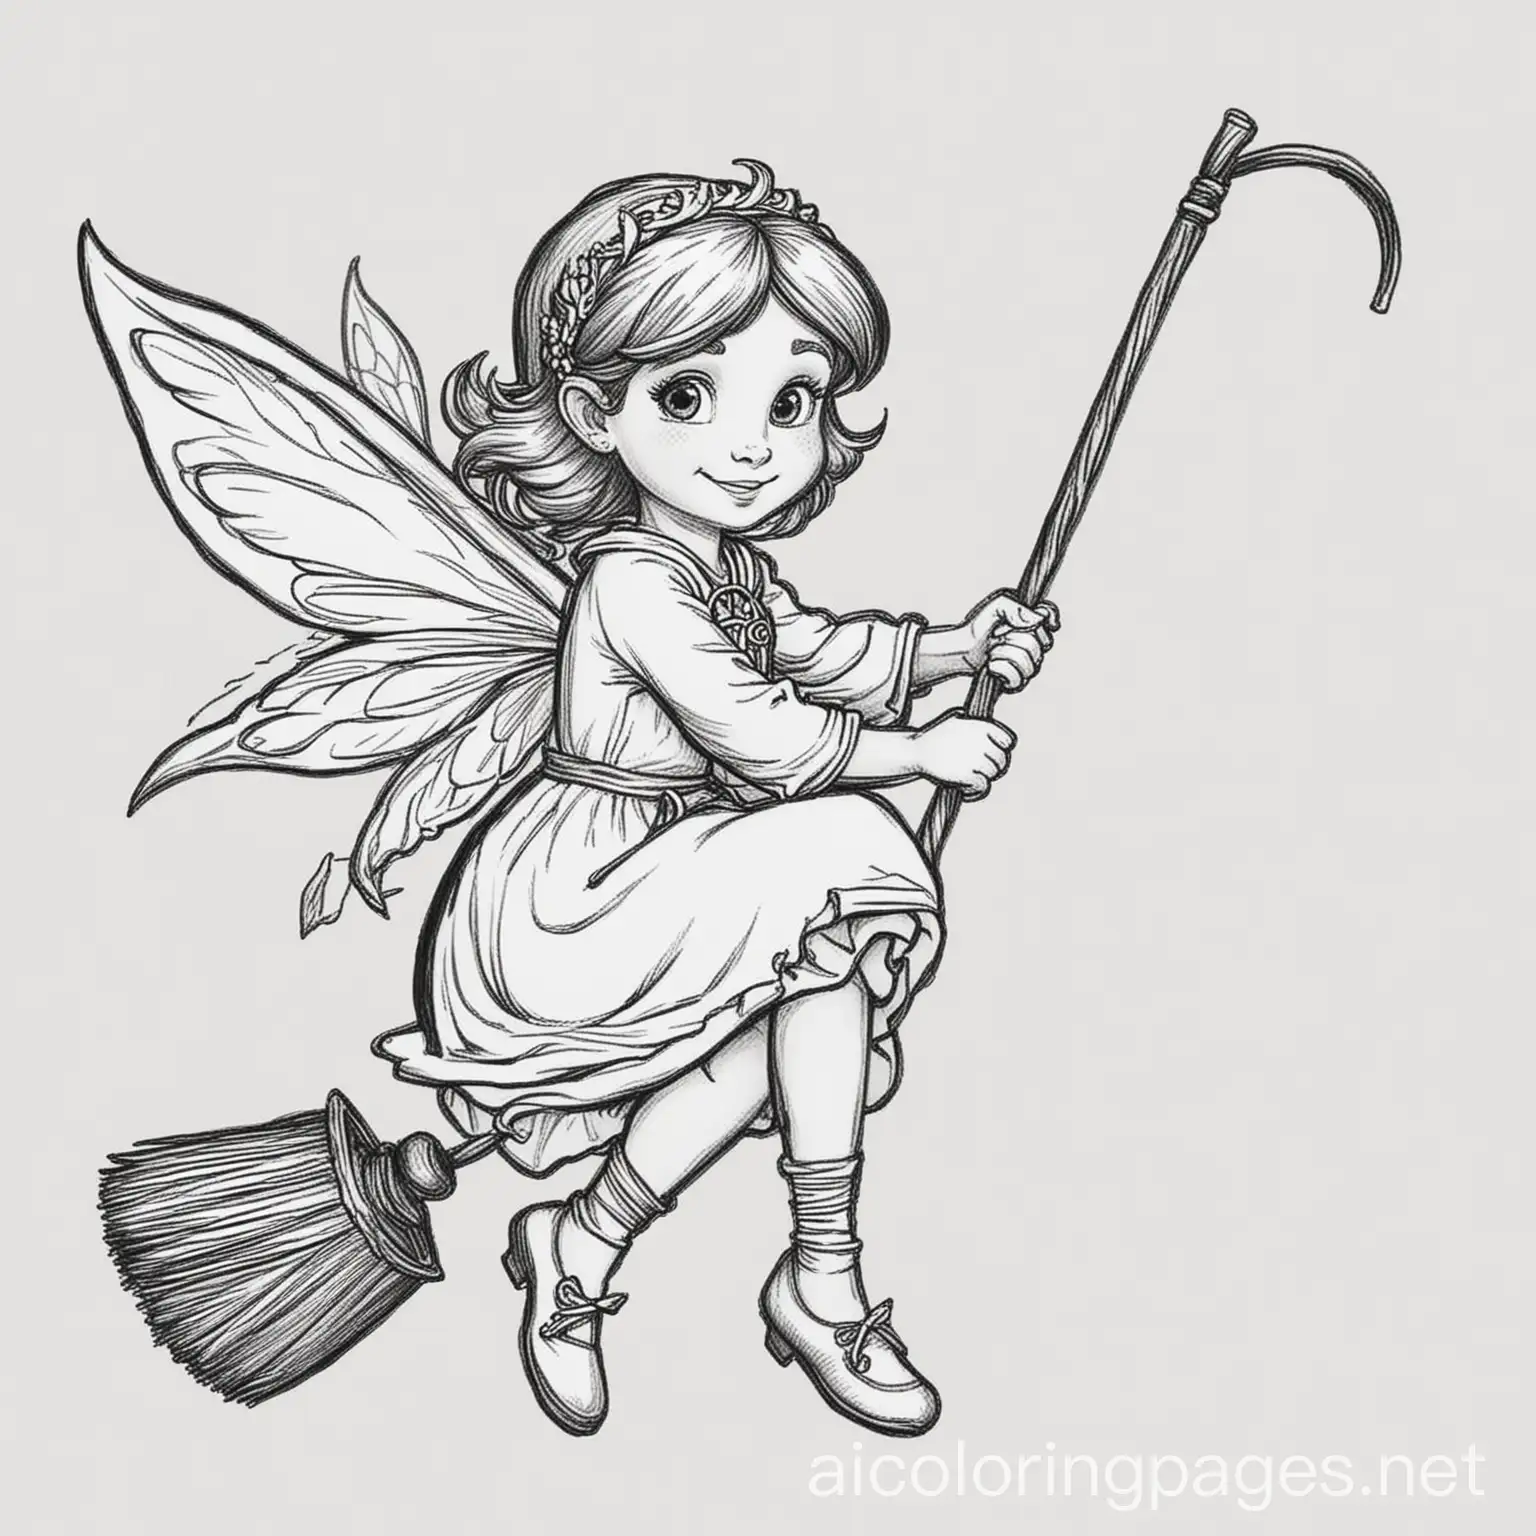 Fairy-Riding-Broomstick-Coloring-Page-for-Kids